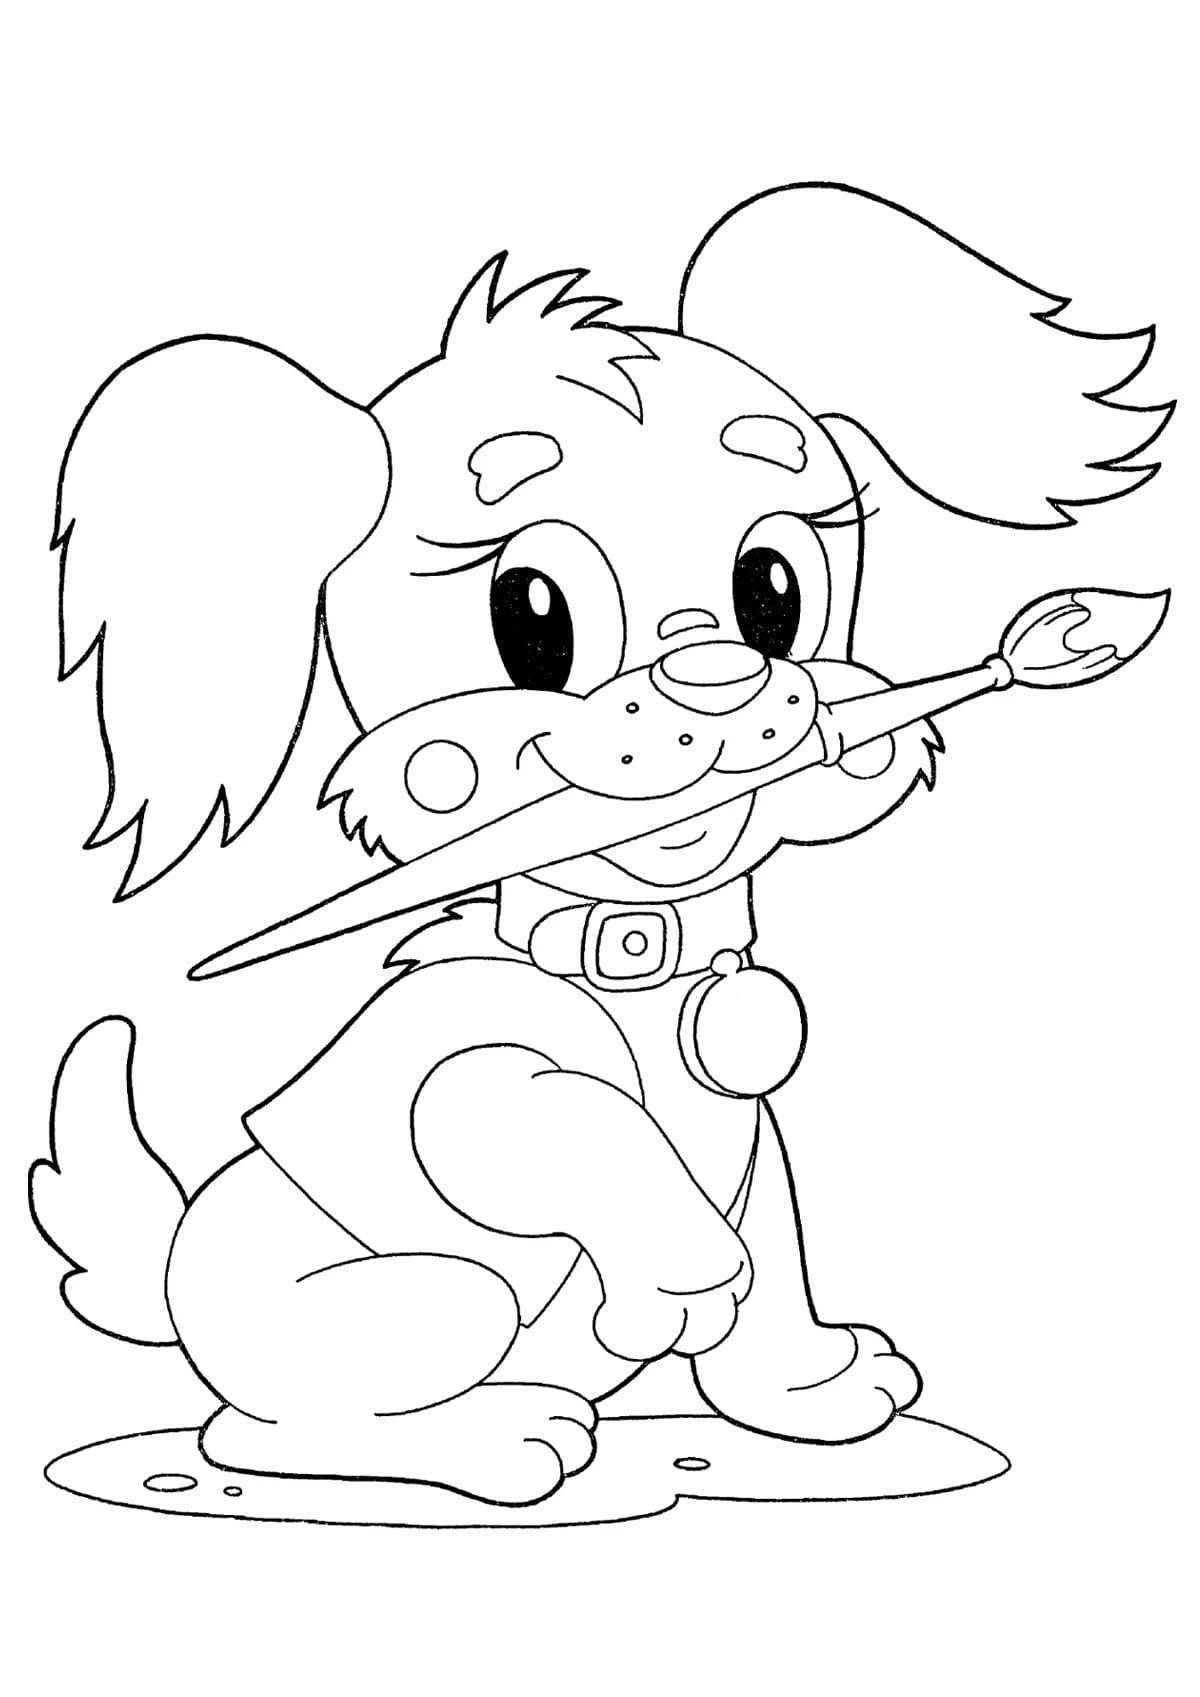 Glitter dog coloring book for kids